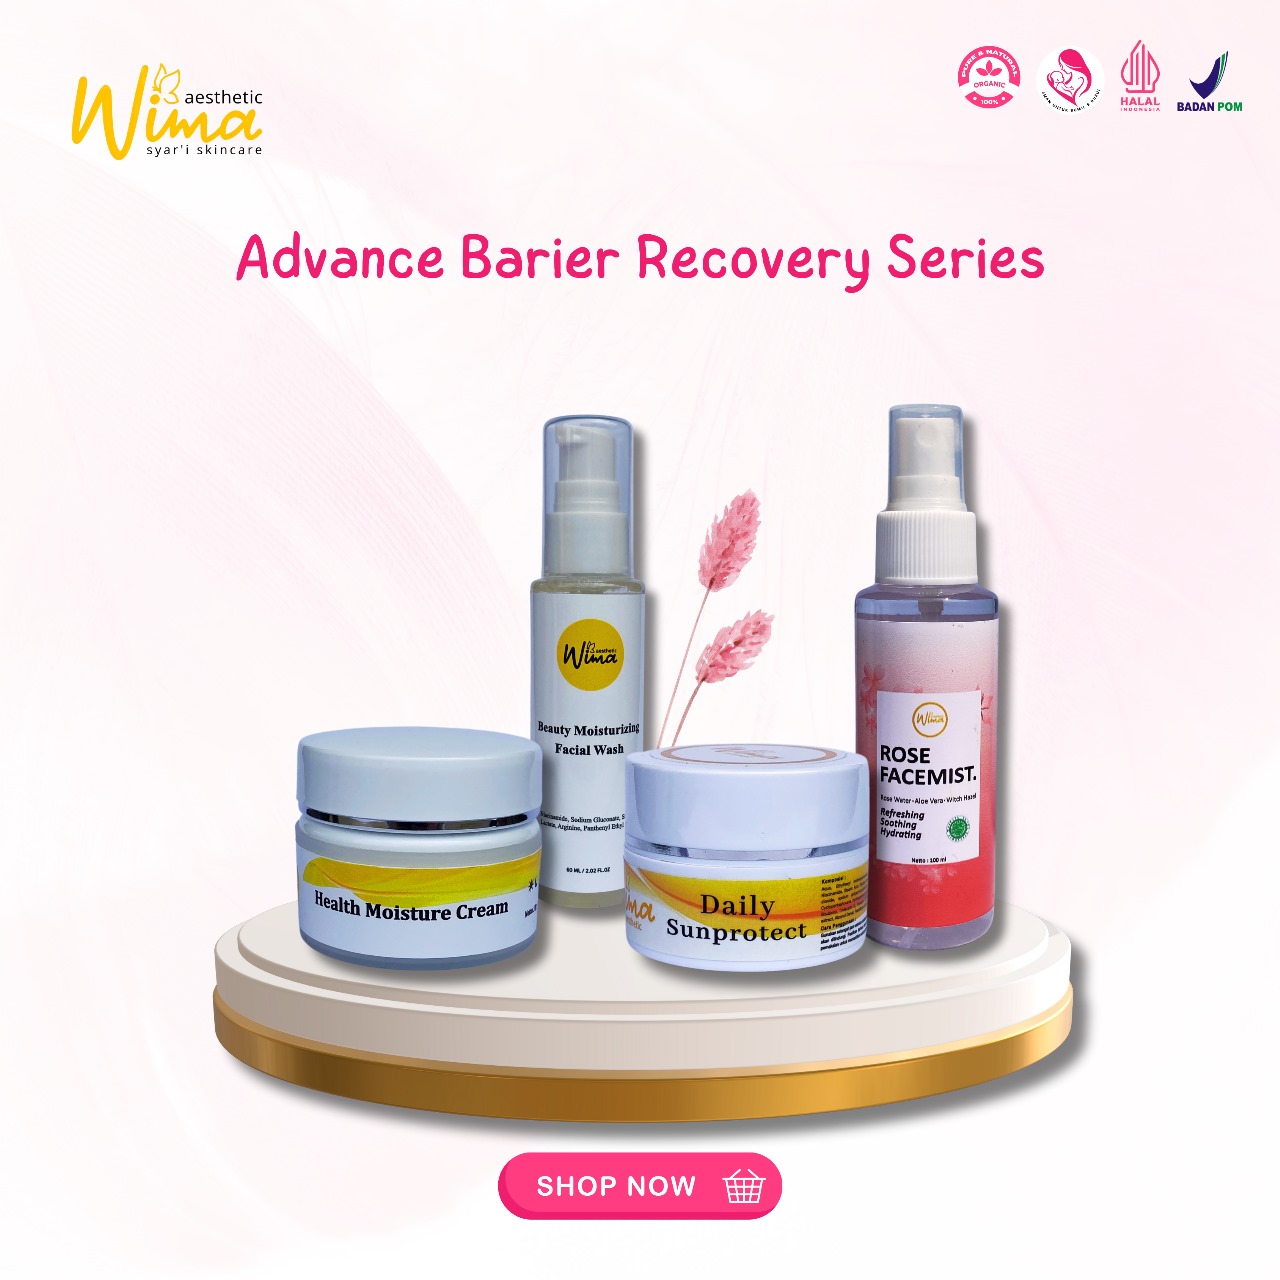 Advance Barier Recovery Series